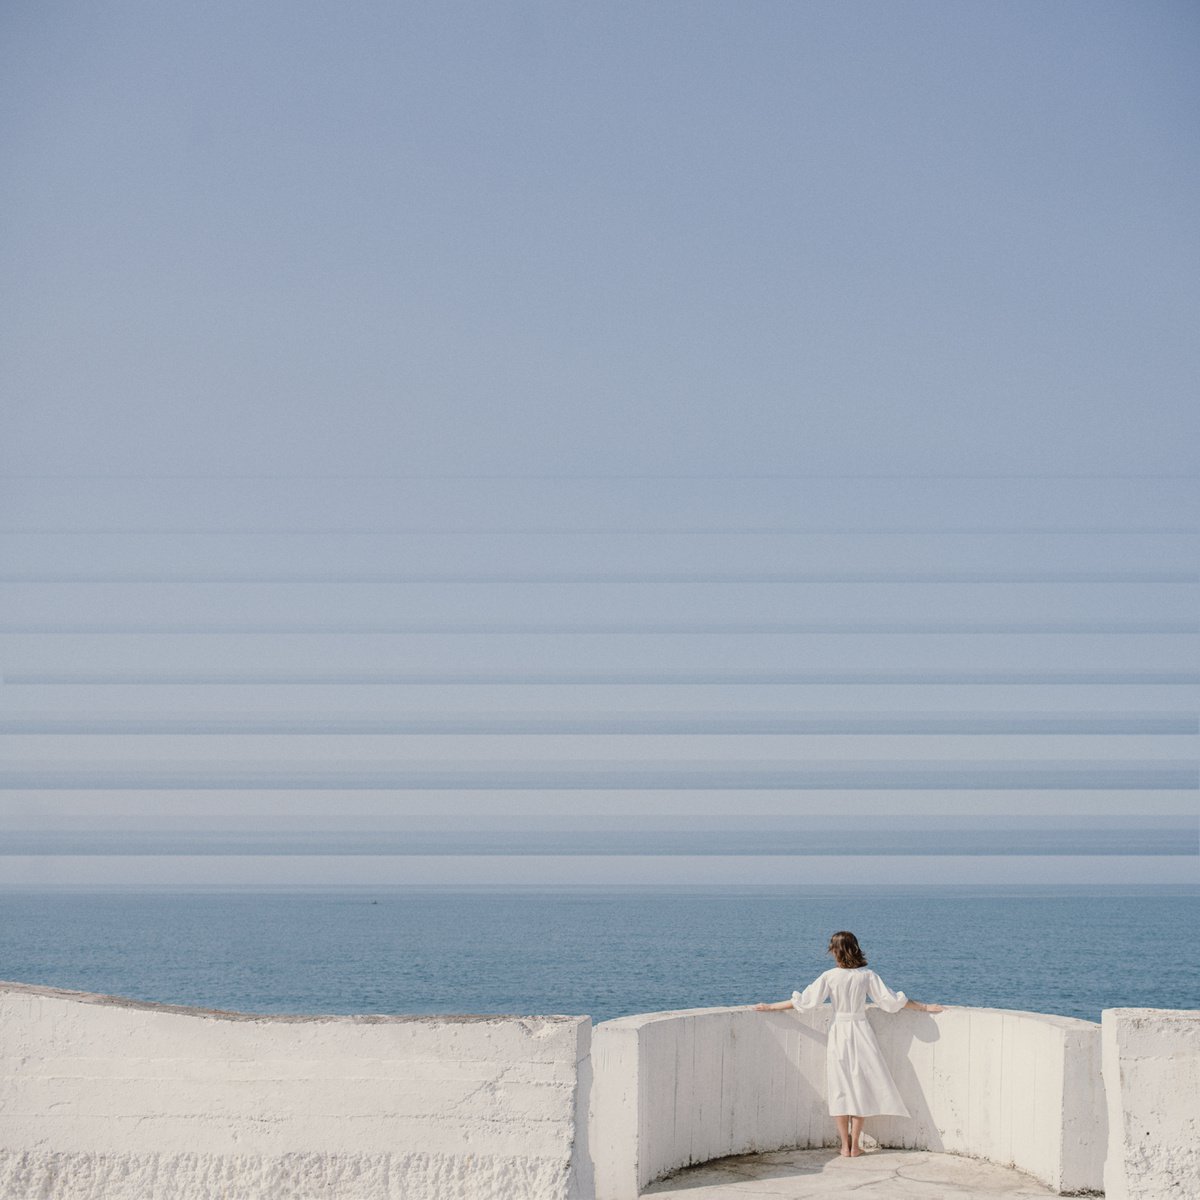 Into The Blue by Dasha Pears